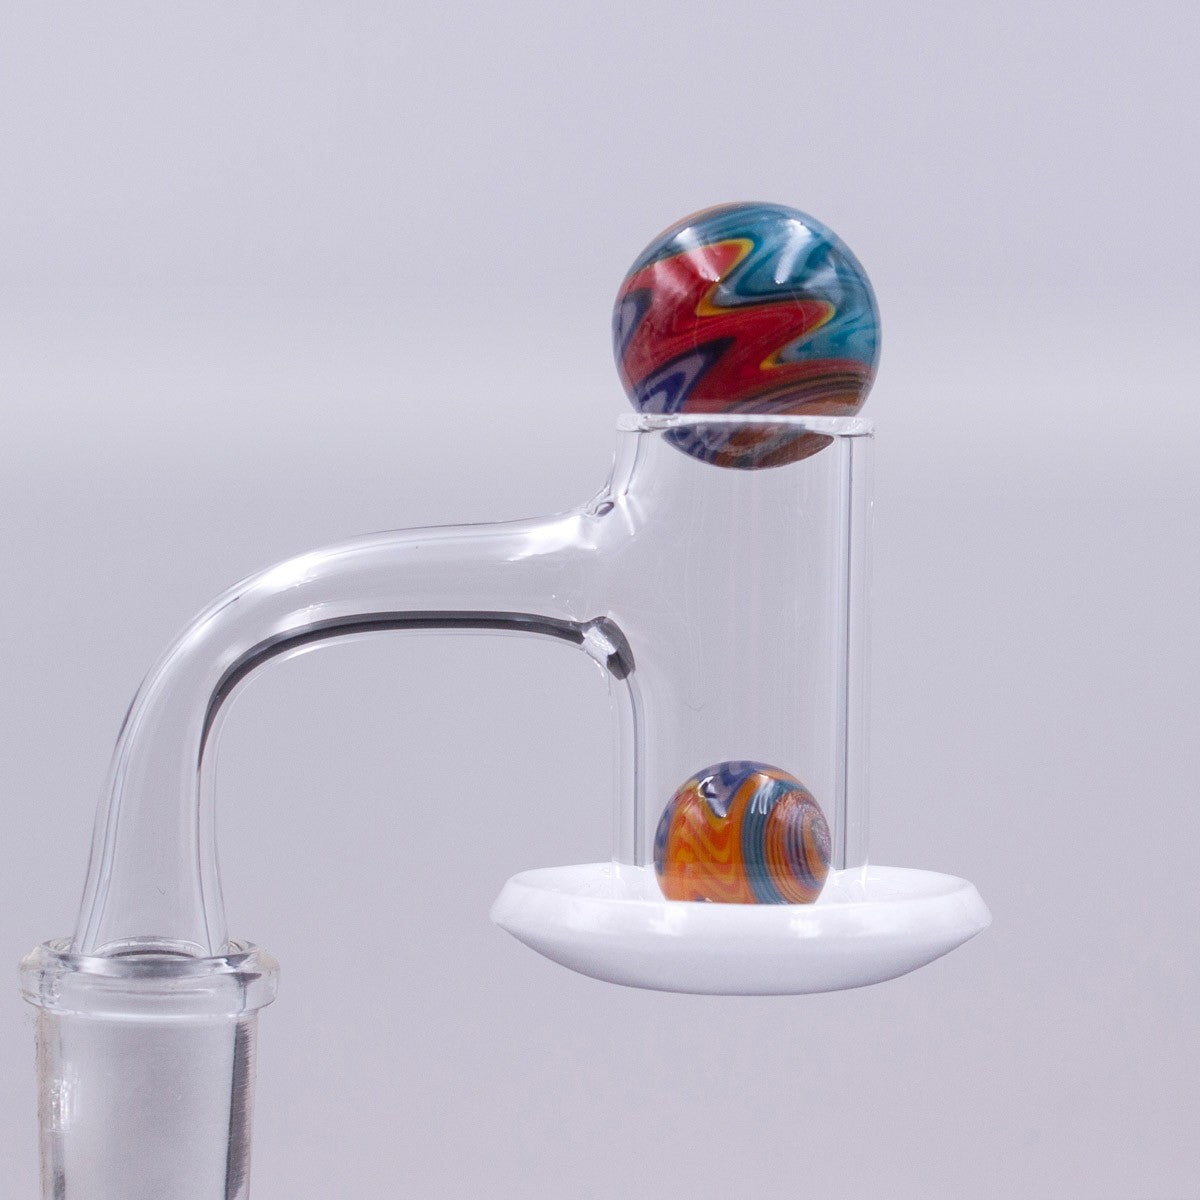 Opaque Bottom Full Weld Blender Quartz Banger by The Stash Shack with colorful glass accents